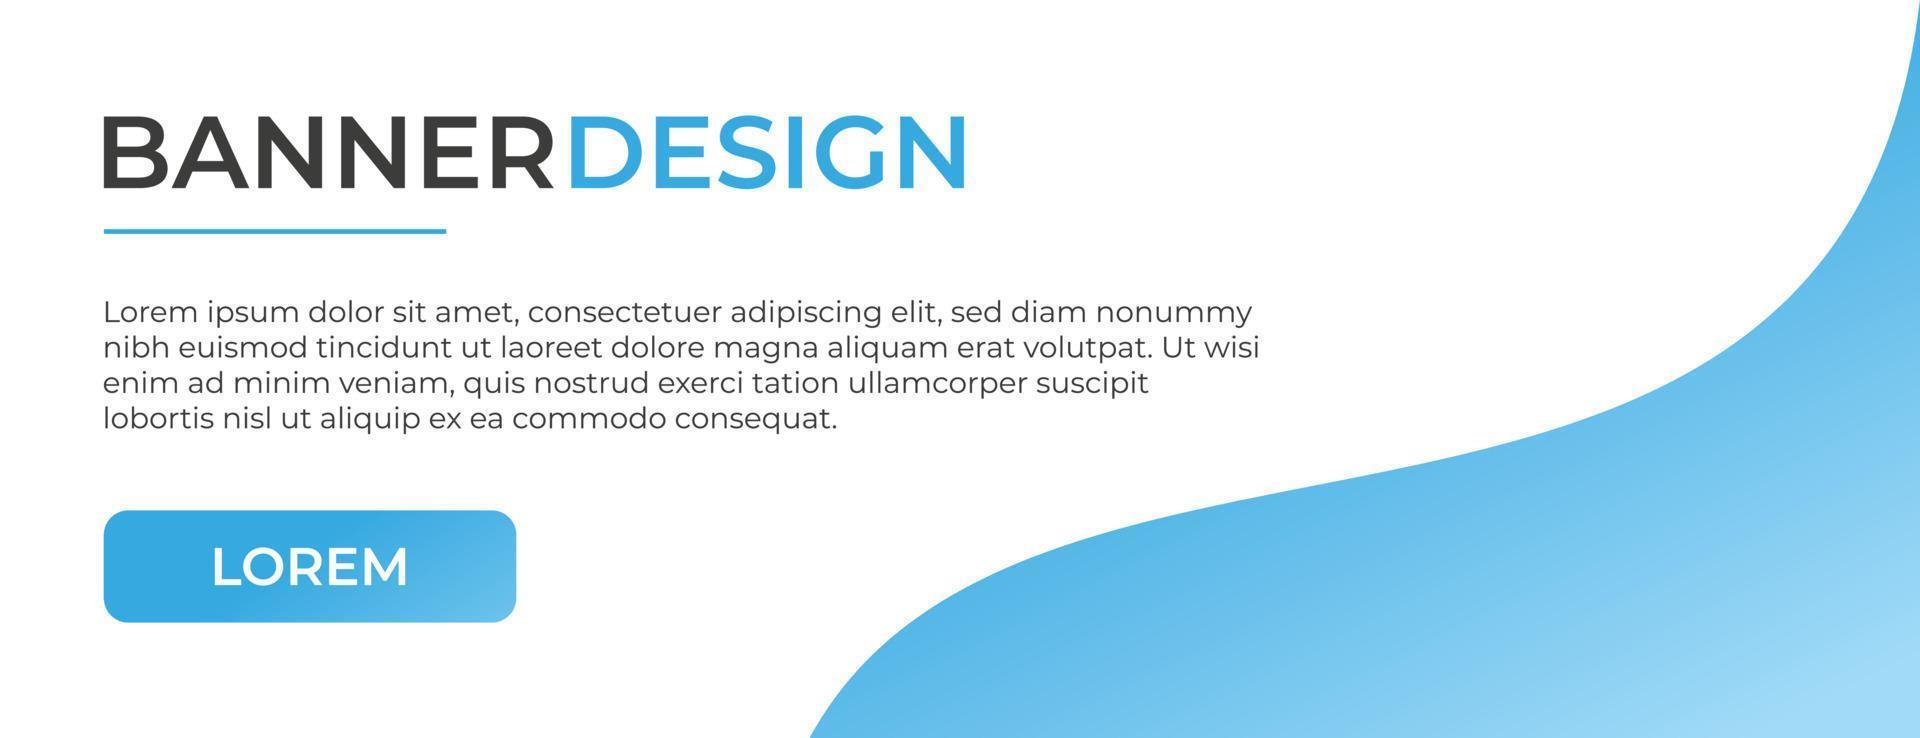 blue banner design . modern banner template design with blue color. banner for social media cover, website and much more vector